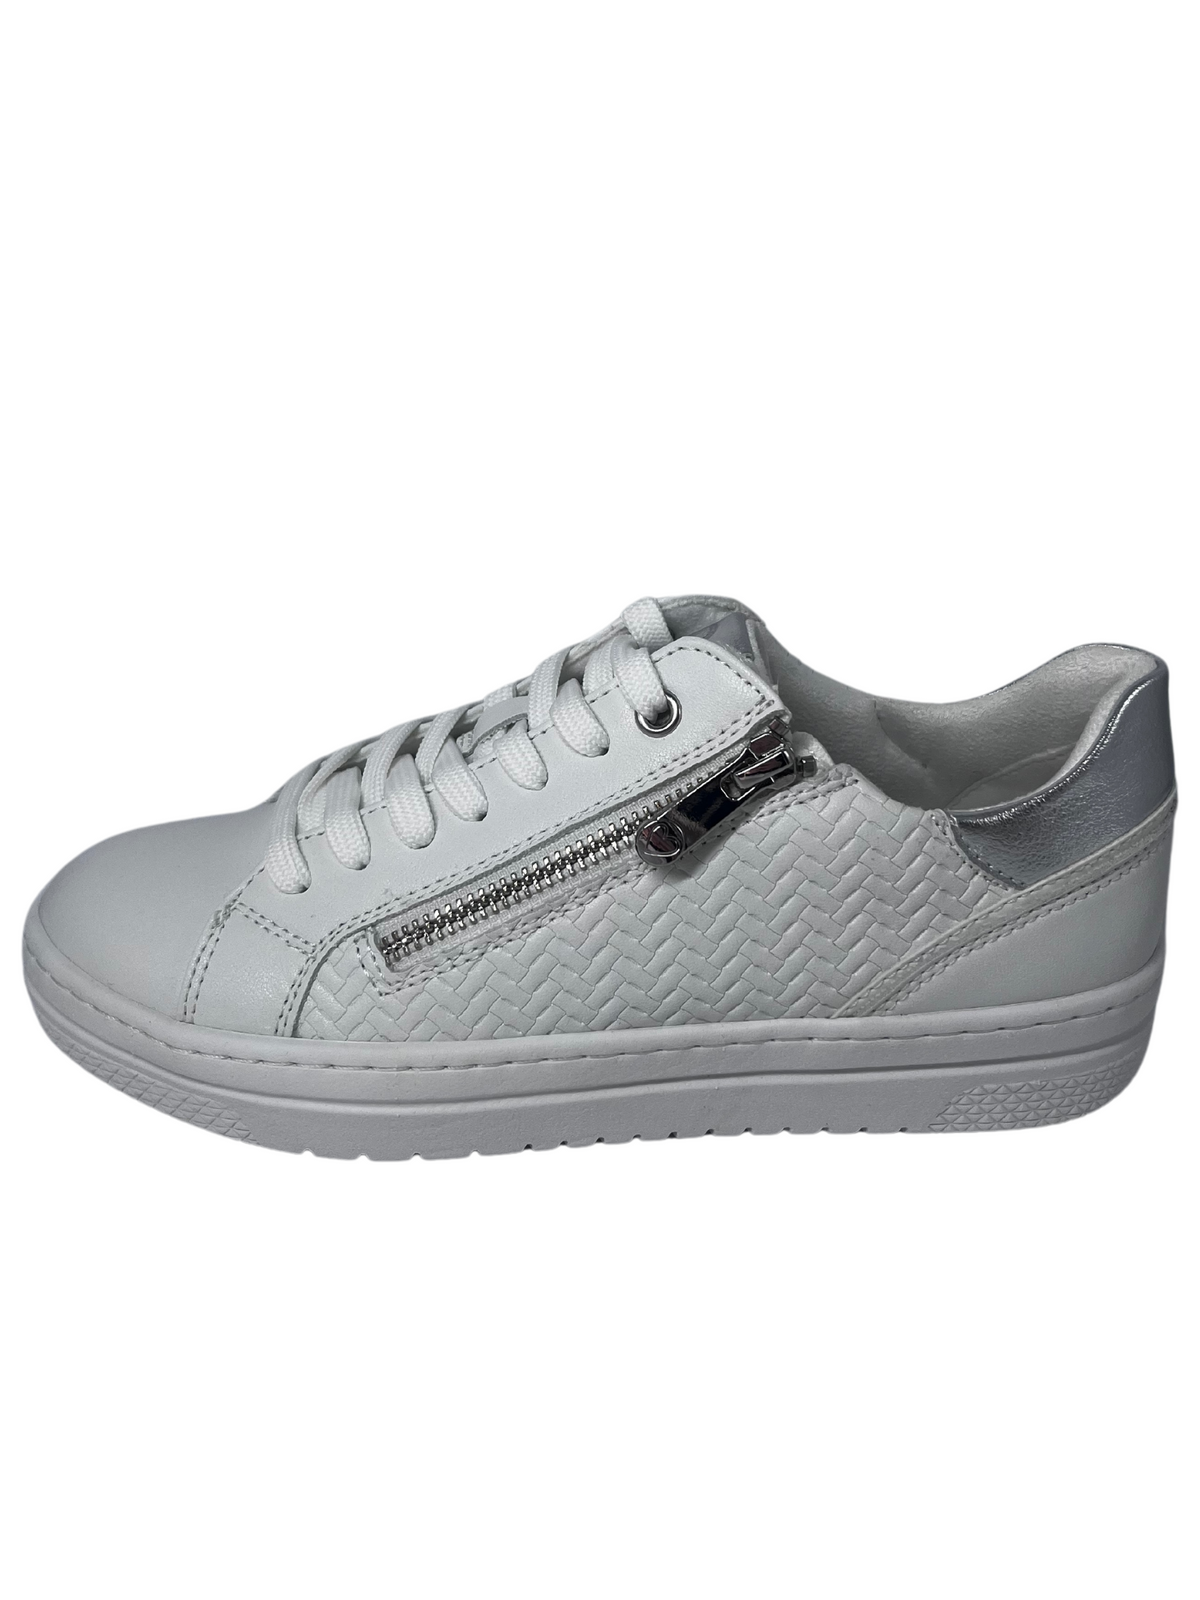 Marco Tozzi White Trainer With Woven Design On side